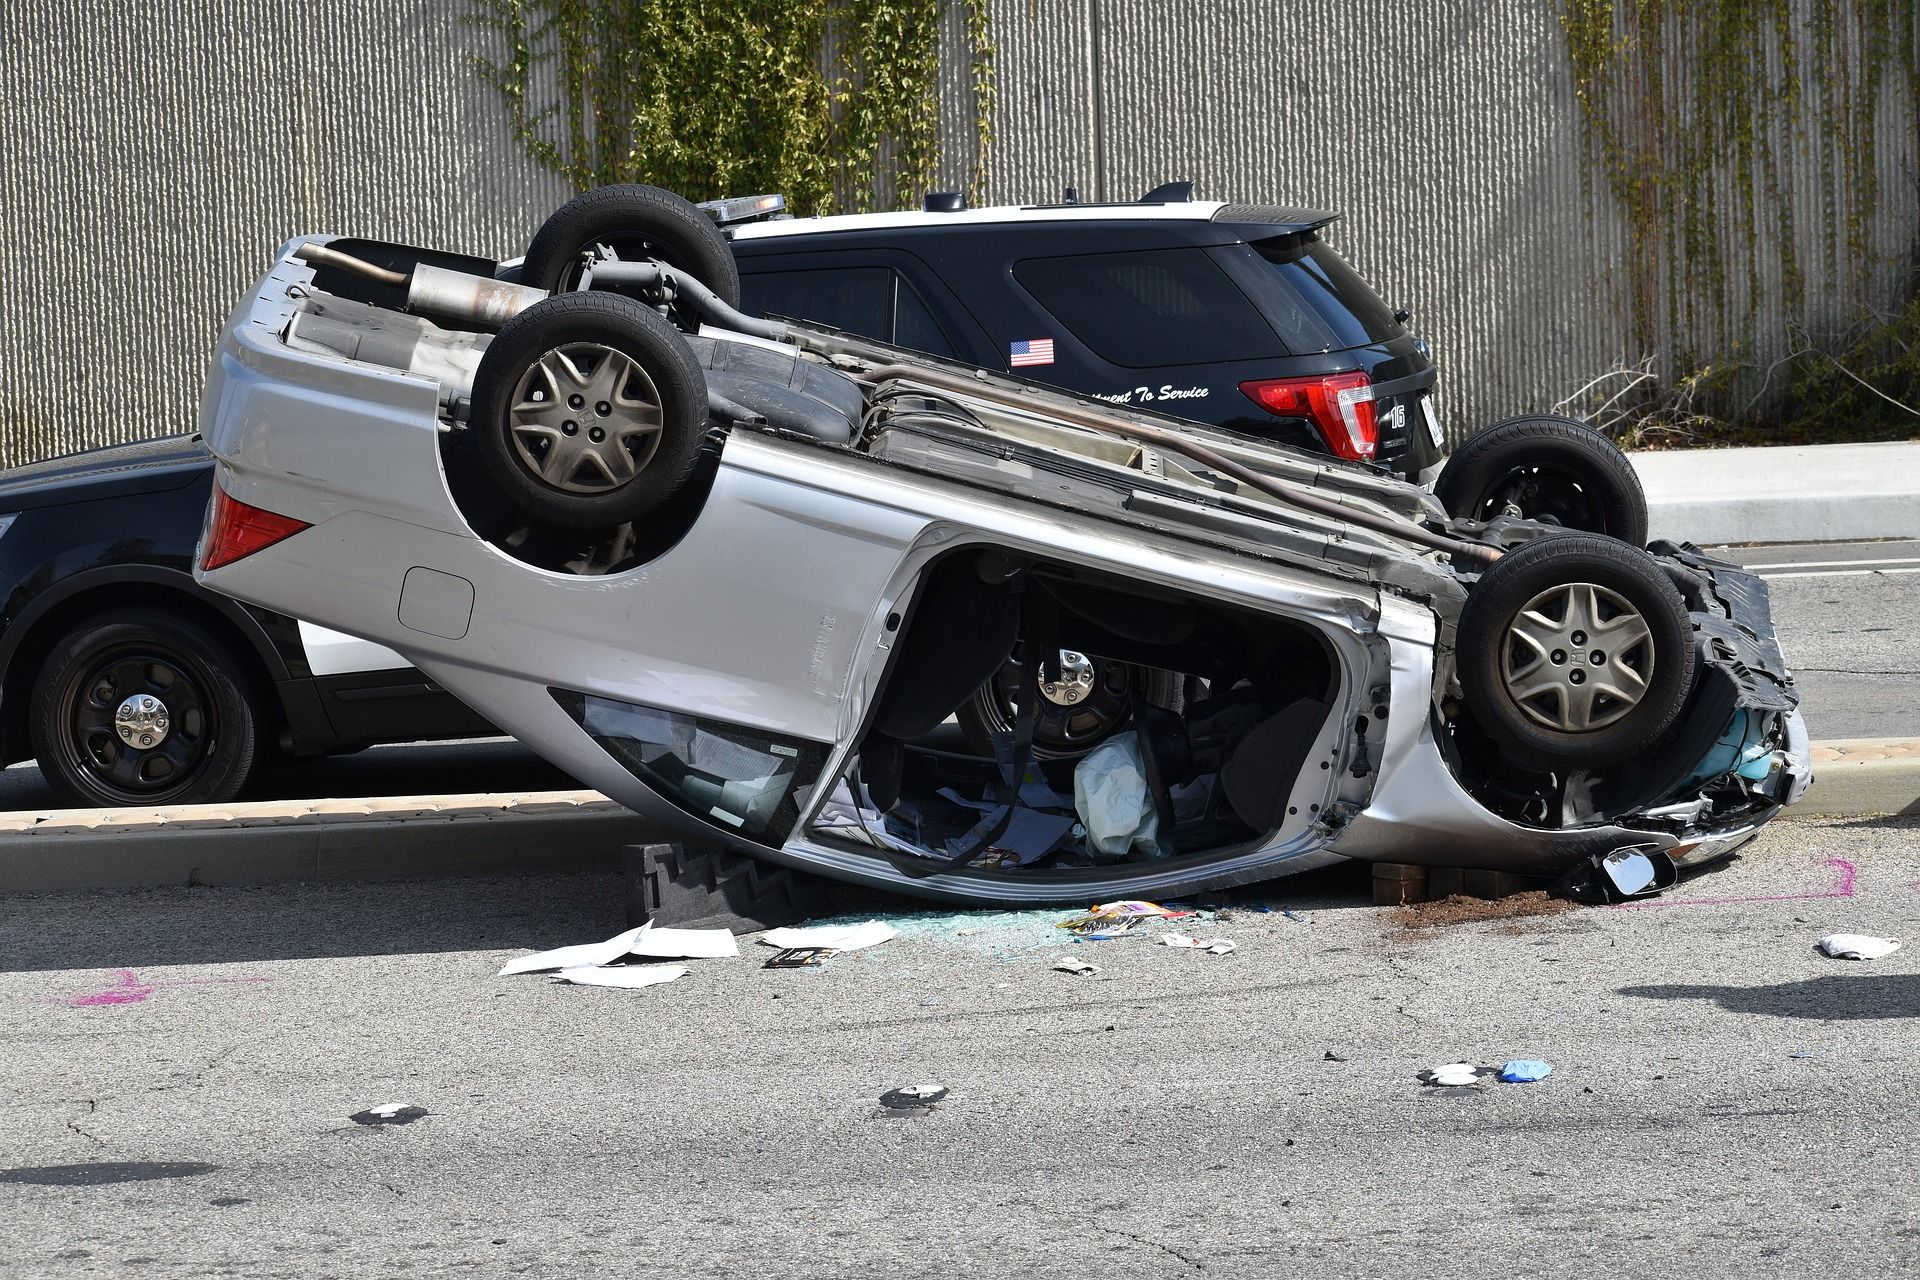 A grey Honda Civic coupe is in a serious accident that rolls it upside down